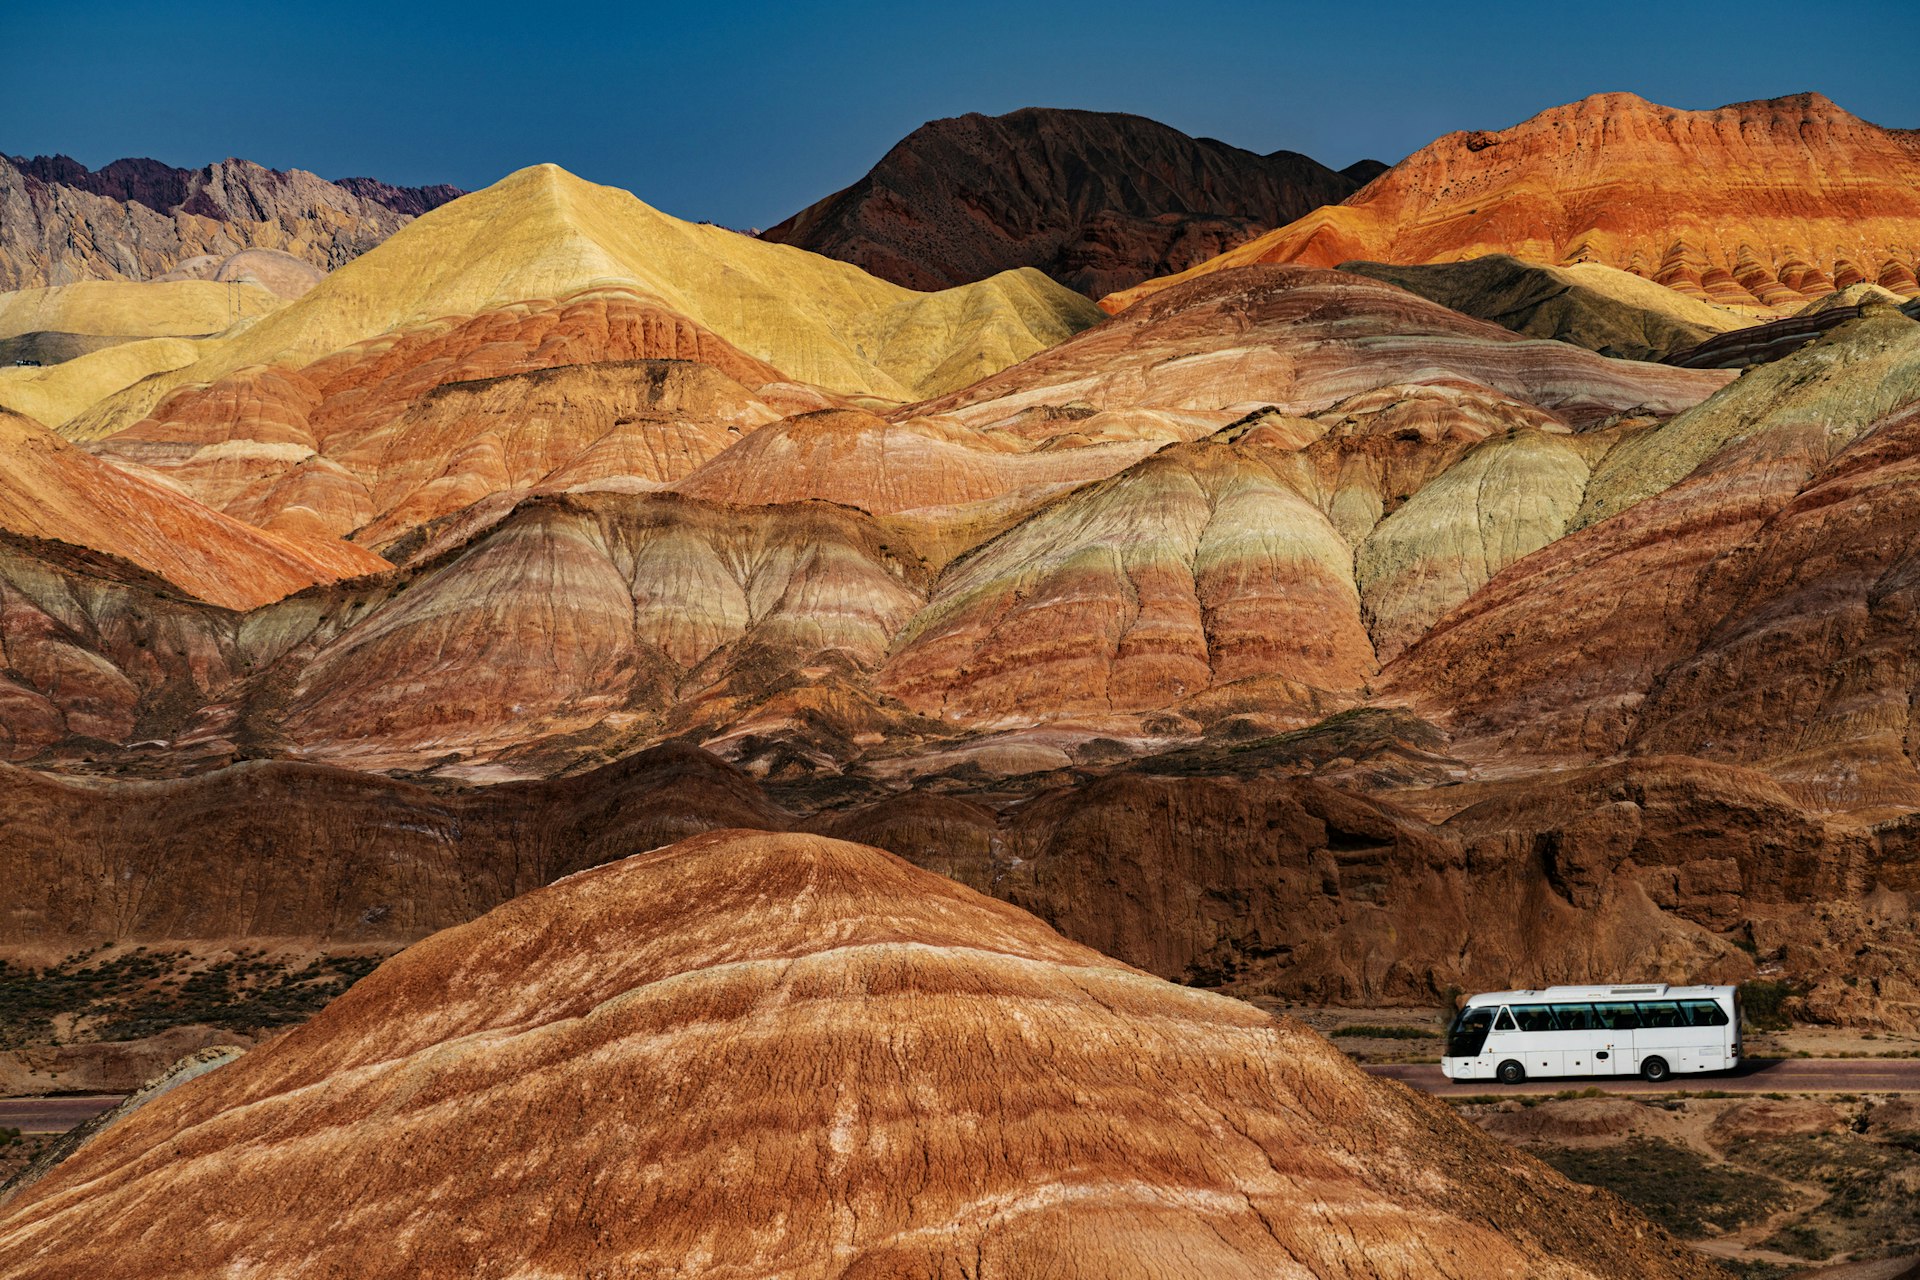 A white bus travels along the road in front of the brightly-coloured hills of Zhangye National Geopark in China